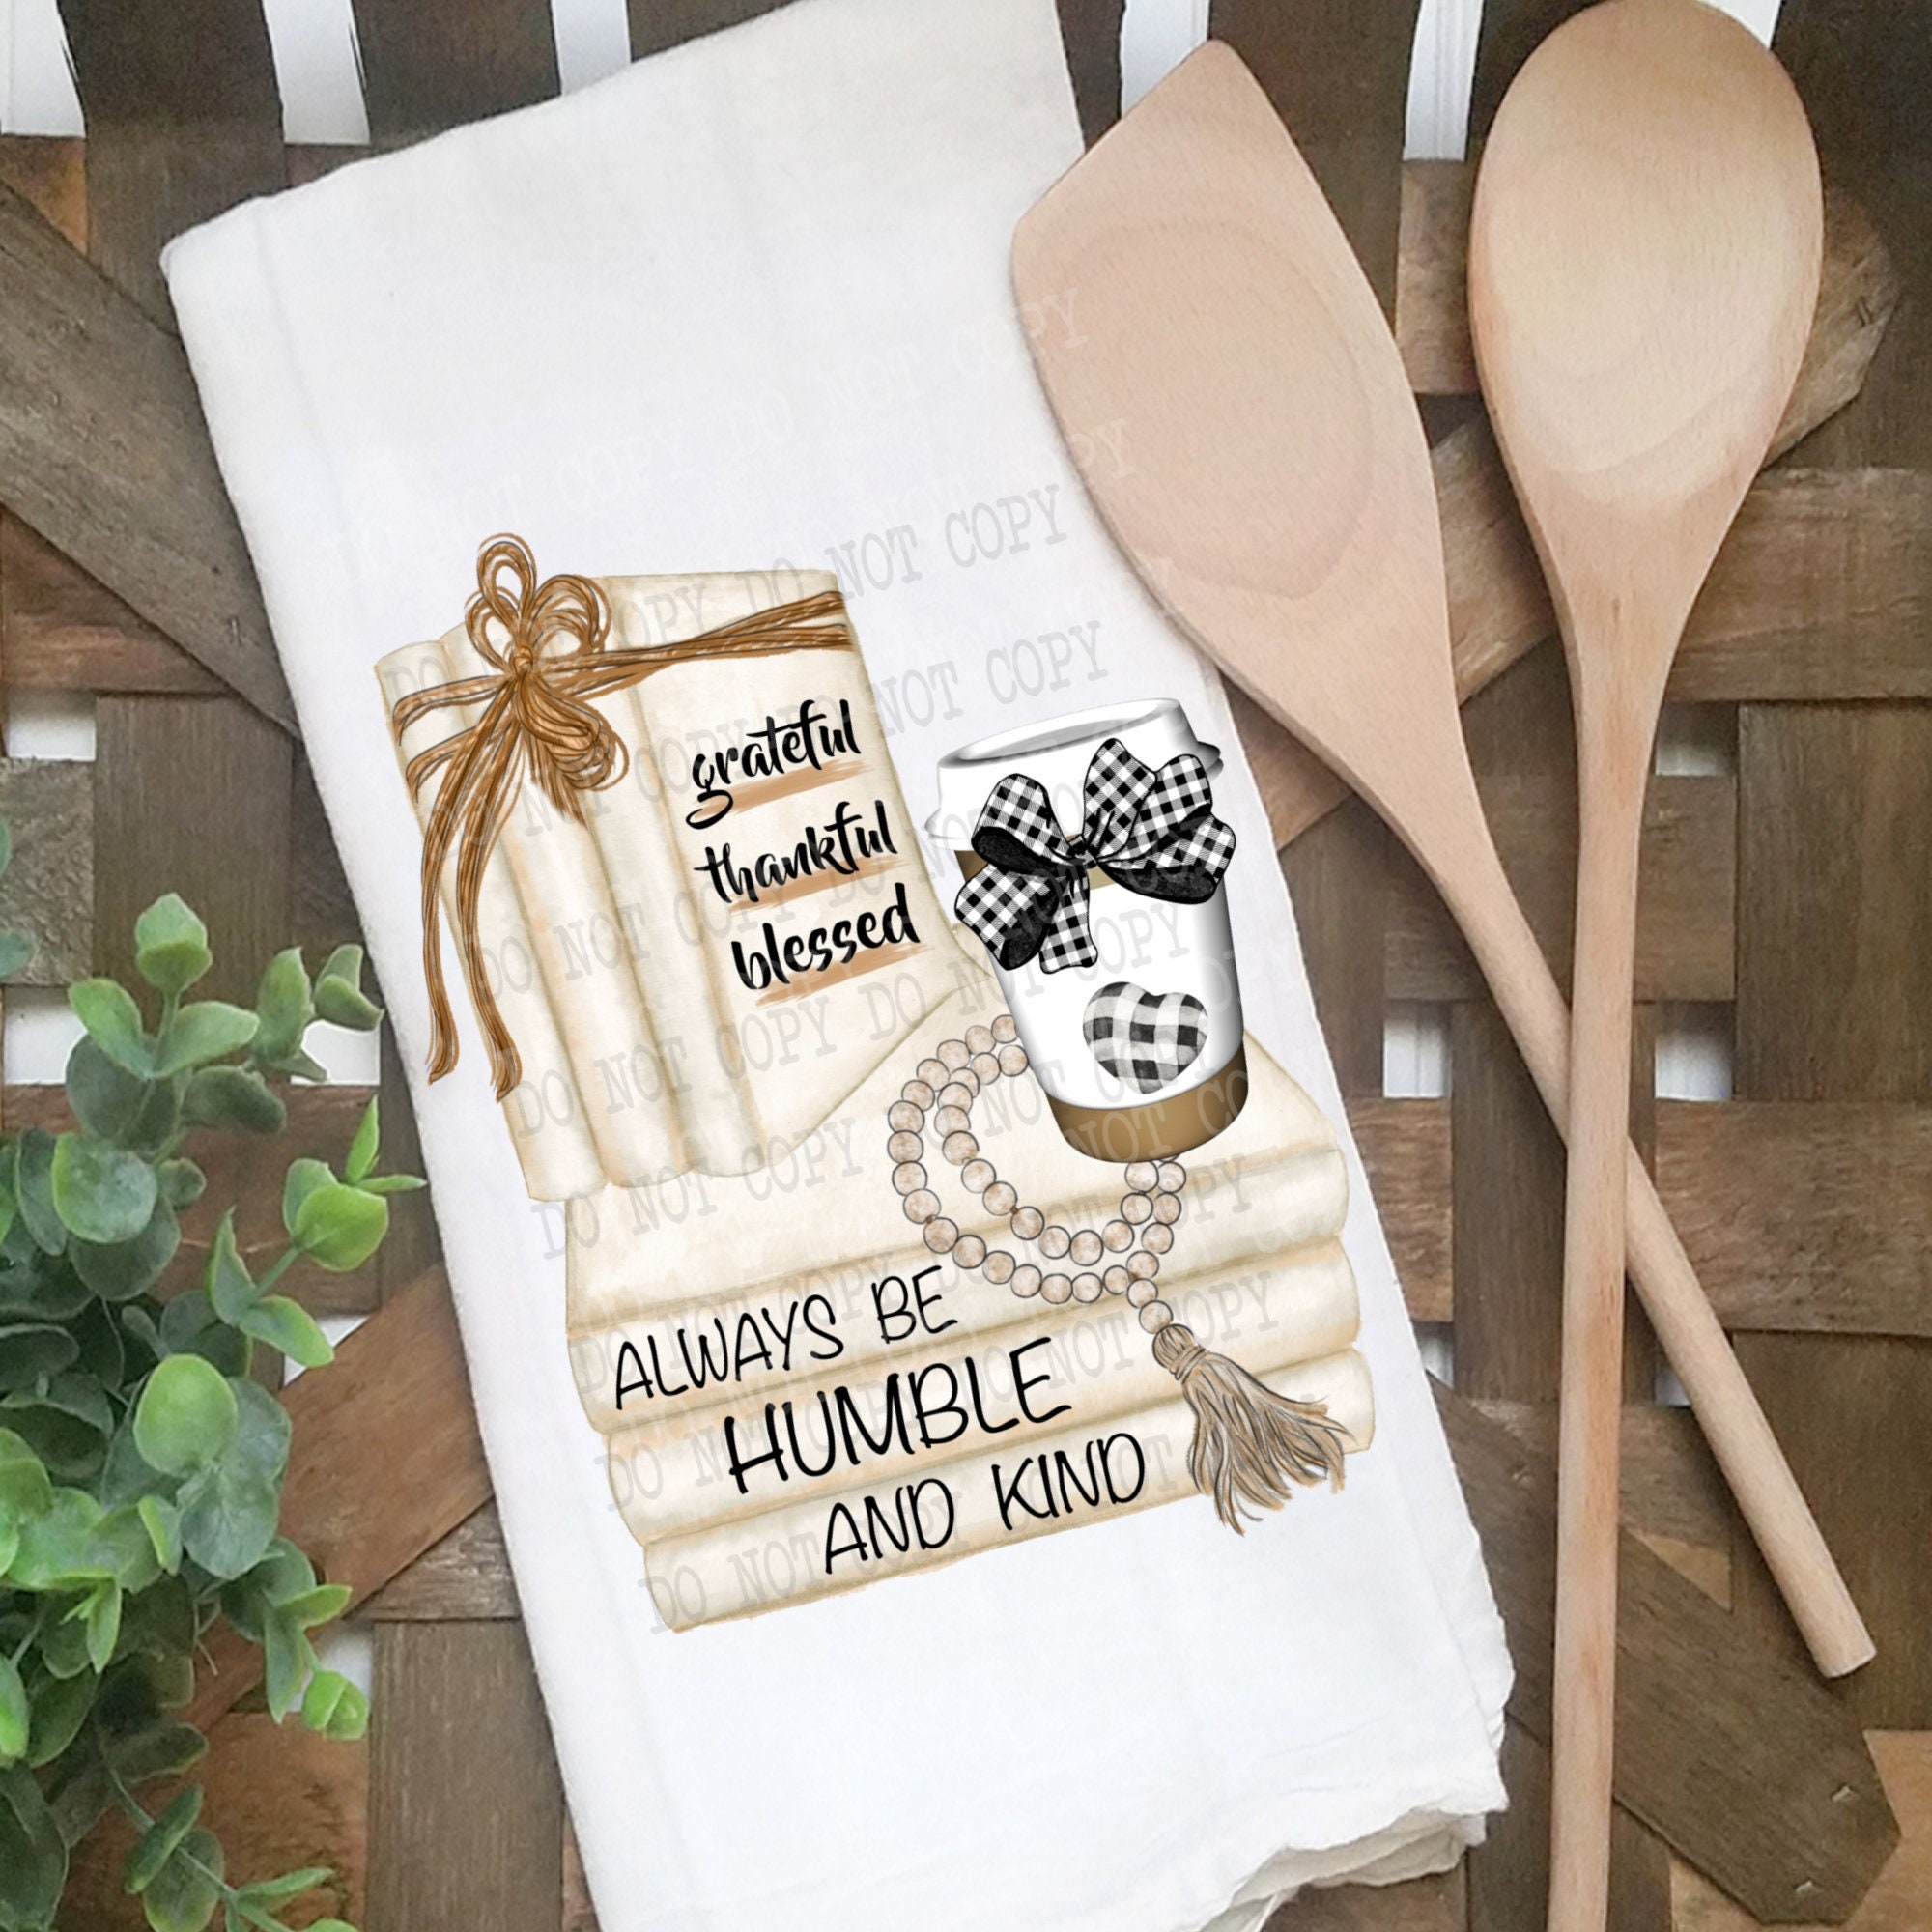 Cute Kitchen Towels, Fun Dish Towels with Faith, Blessed, Family, Love & Dreams Theme, 5 Flour Sack Towels, White